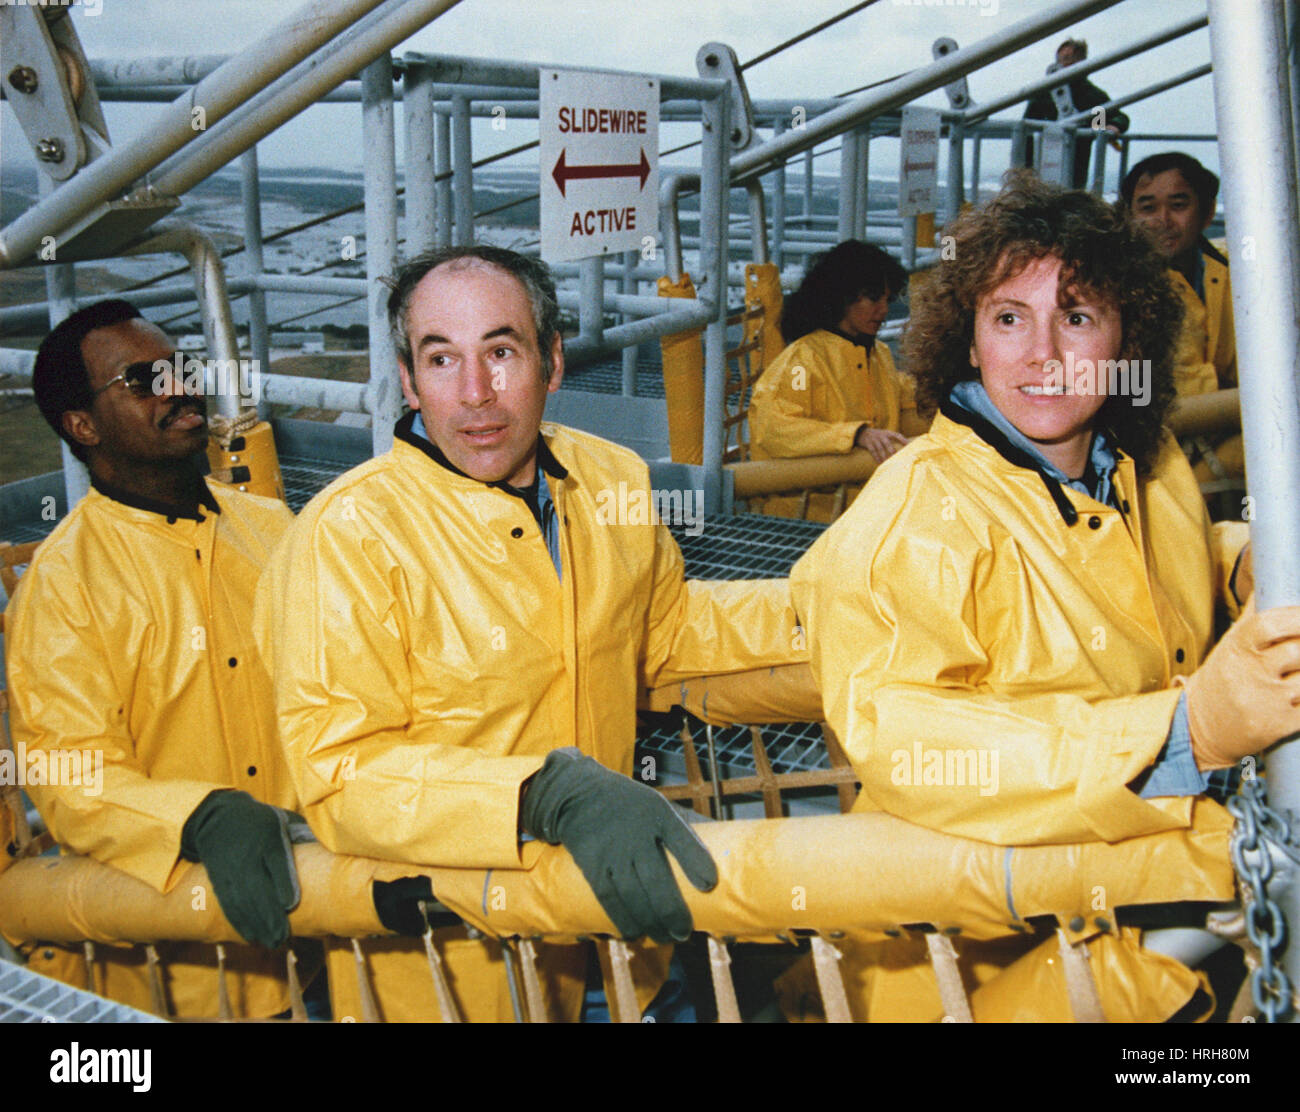 STS-51L Challenger crew in training Stock Photo